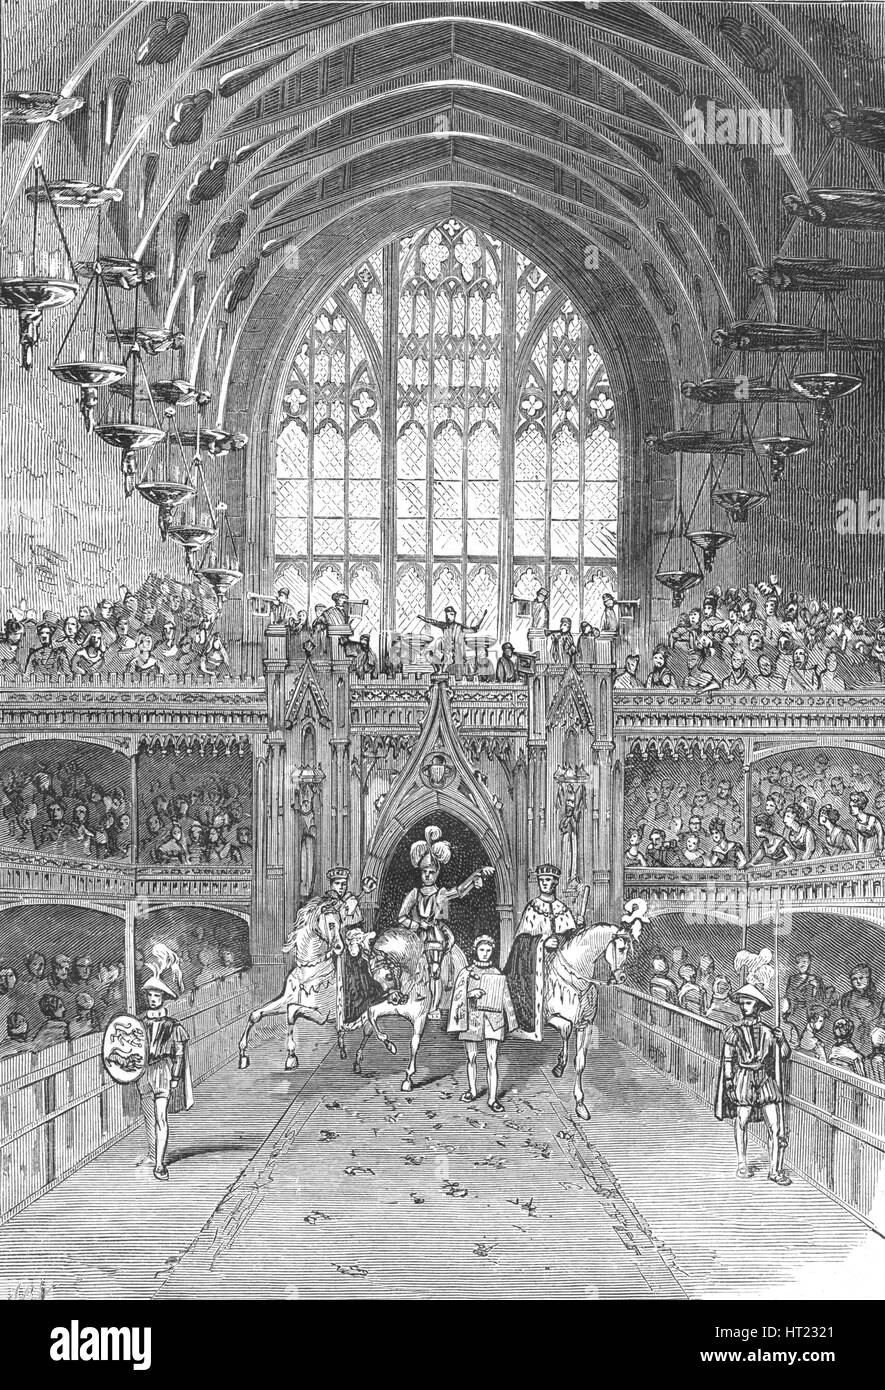 Coronation of George IV in Westminster Hall, 1897. Stock Photo